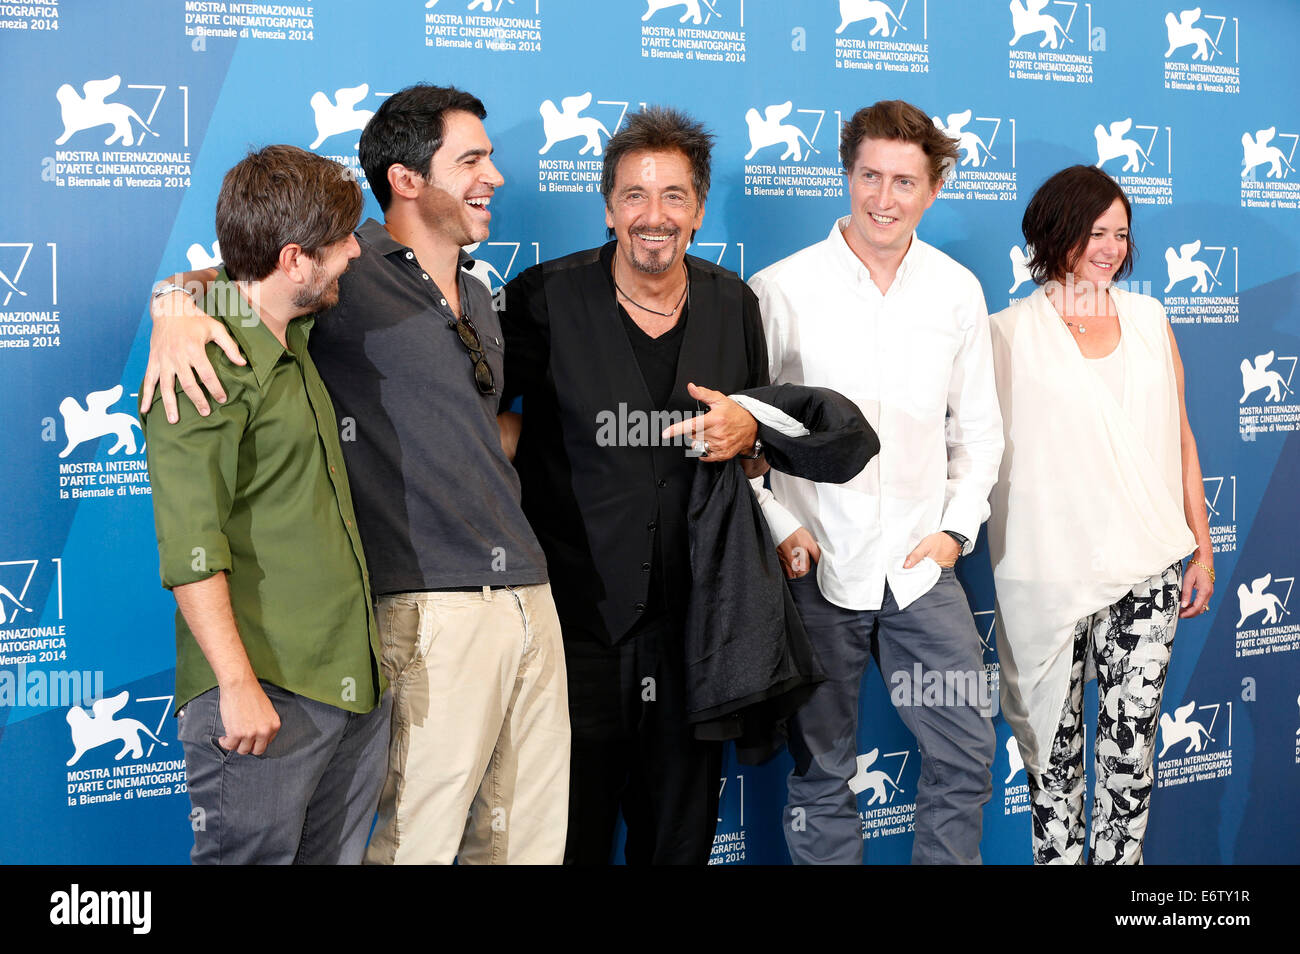 Venice, Italy. 30th Aug, 2014. Paul Logan, Chris Messina, Al Pacino, David Gordon Green and Lisa Muskat during the 'The Humbling/Manglehorn' photocall at the 71nd Venice International Film Festival on August 30, 2014. Credit:  dpa picture alliance/Alamy Live News Stock Photo